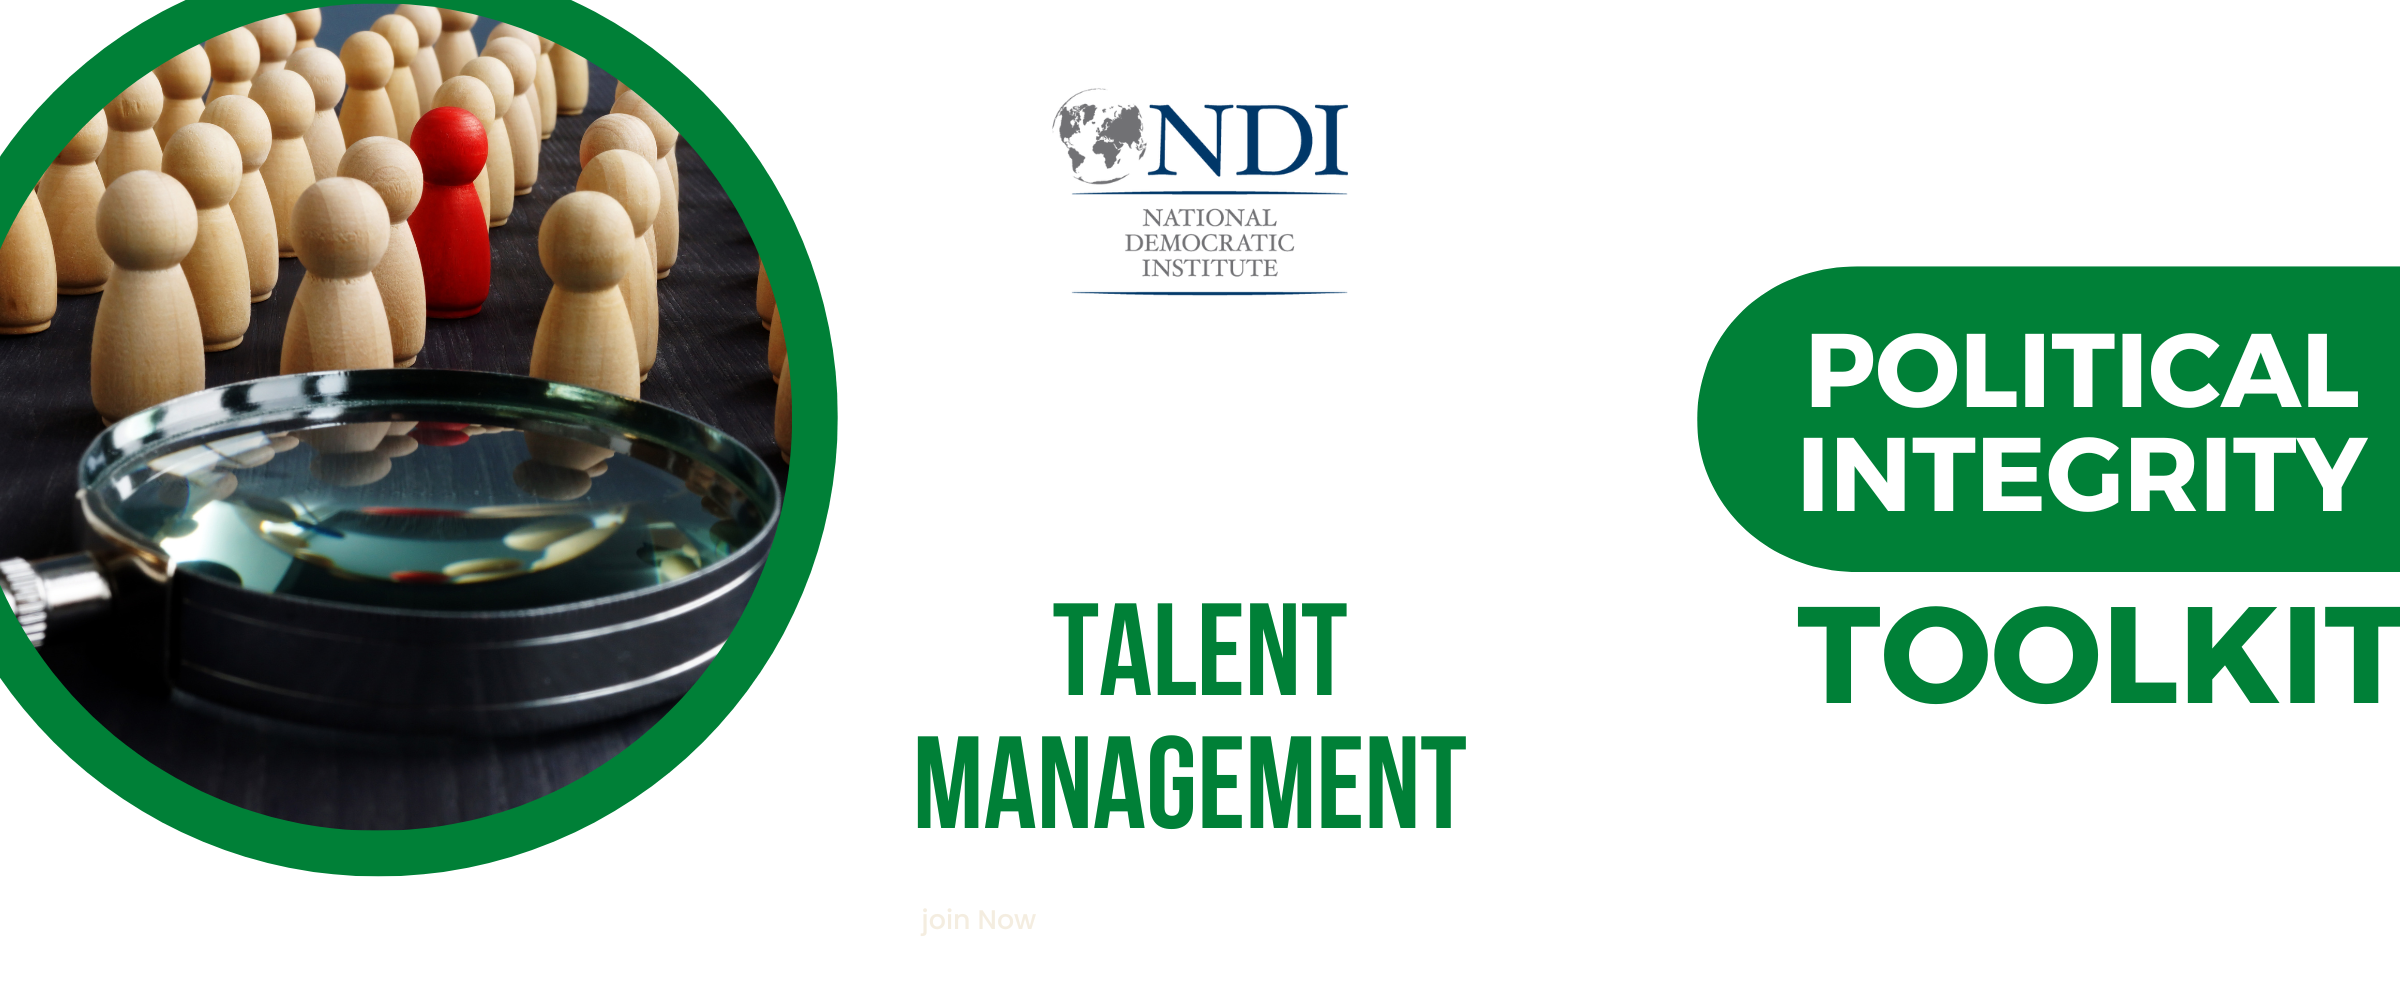 Talent Management in Political Parties